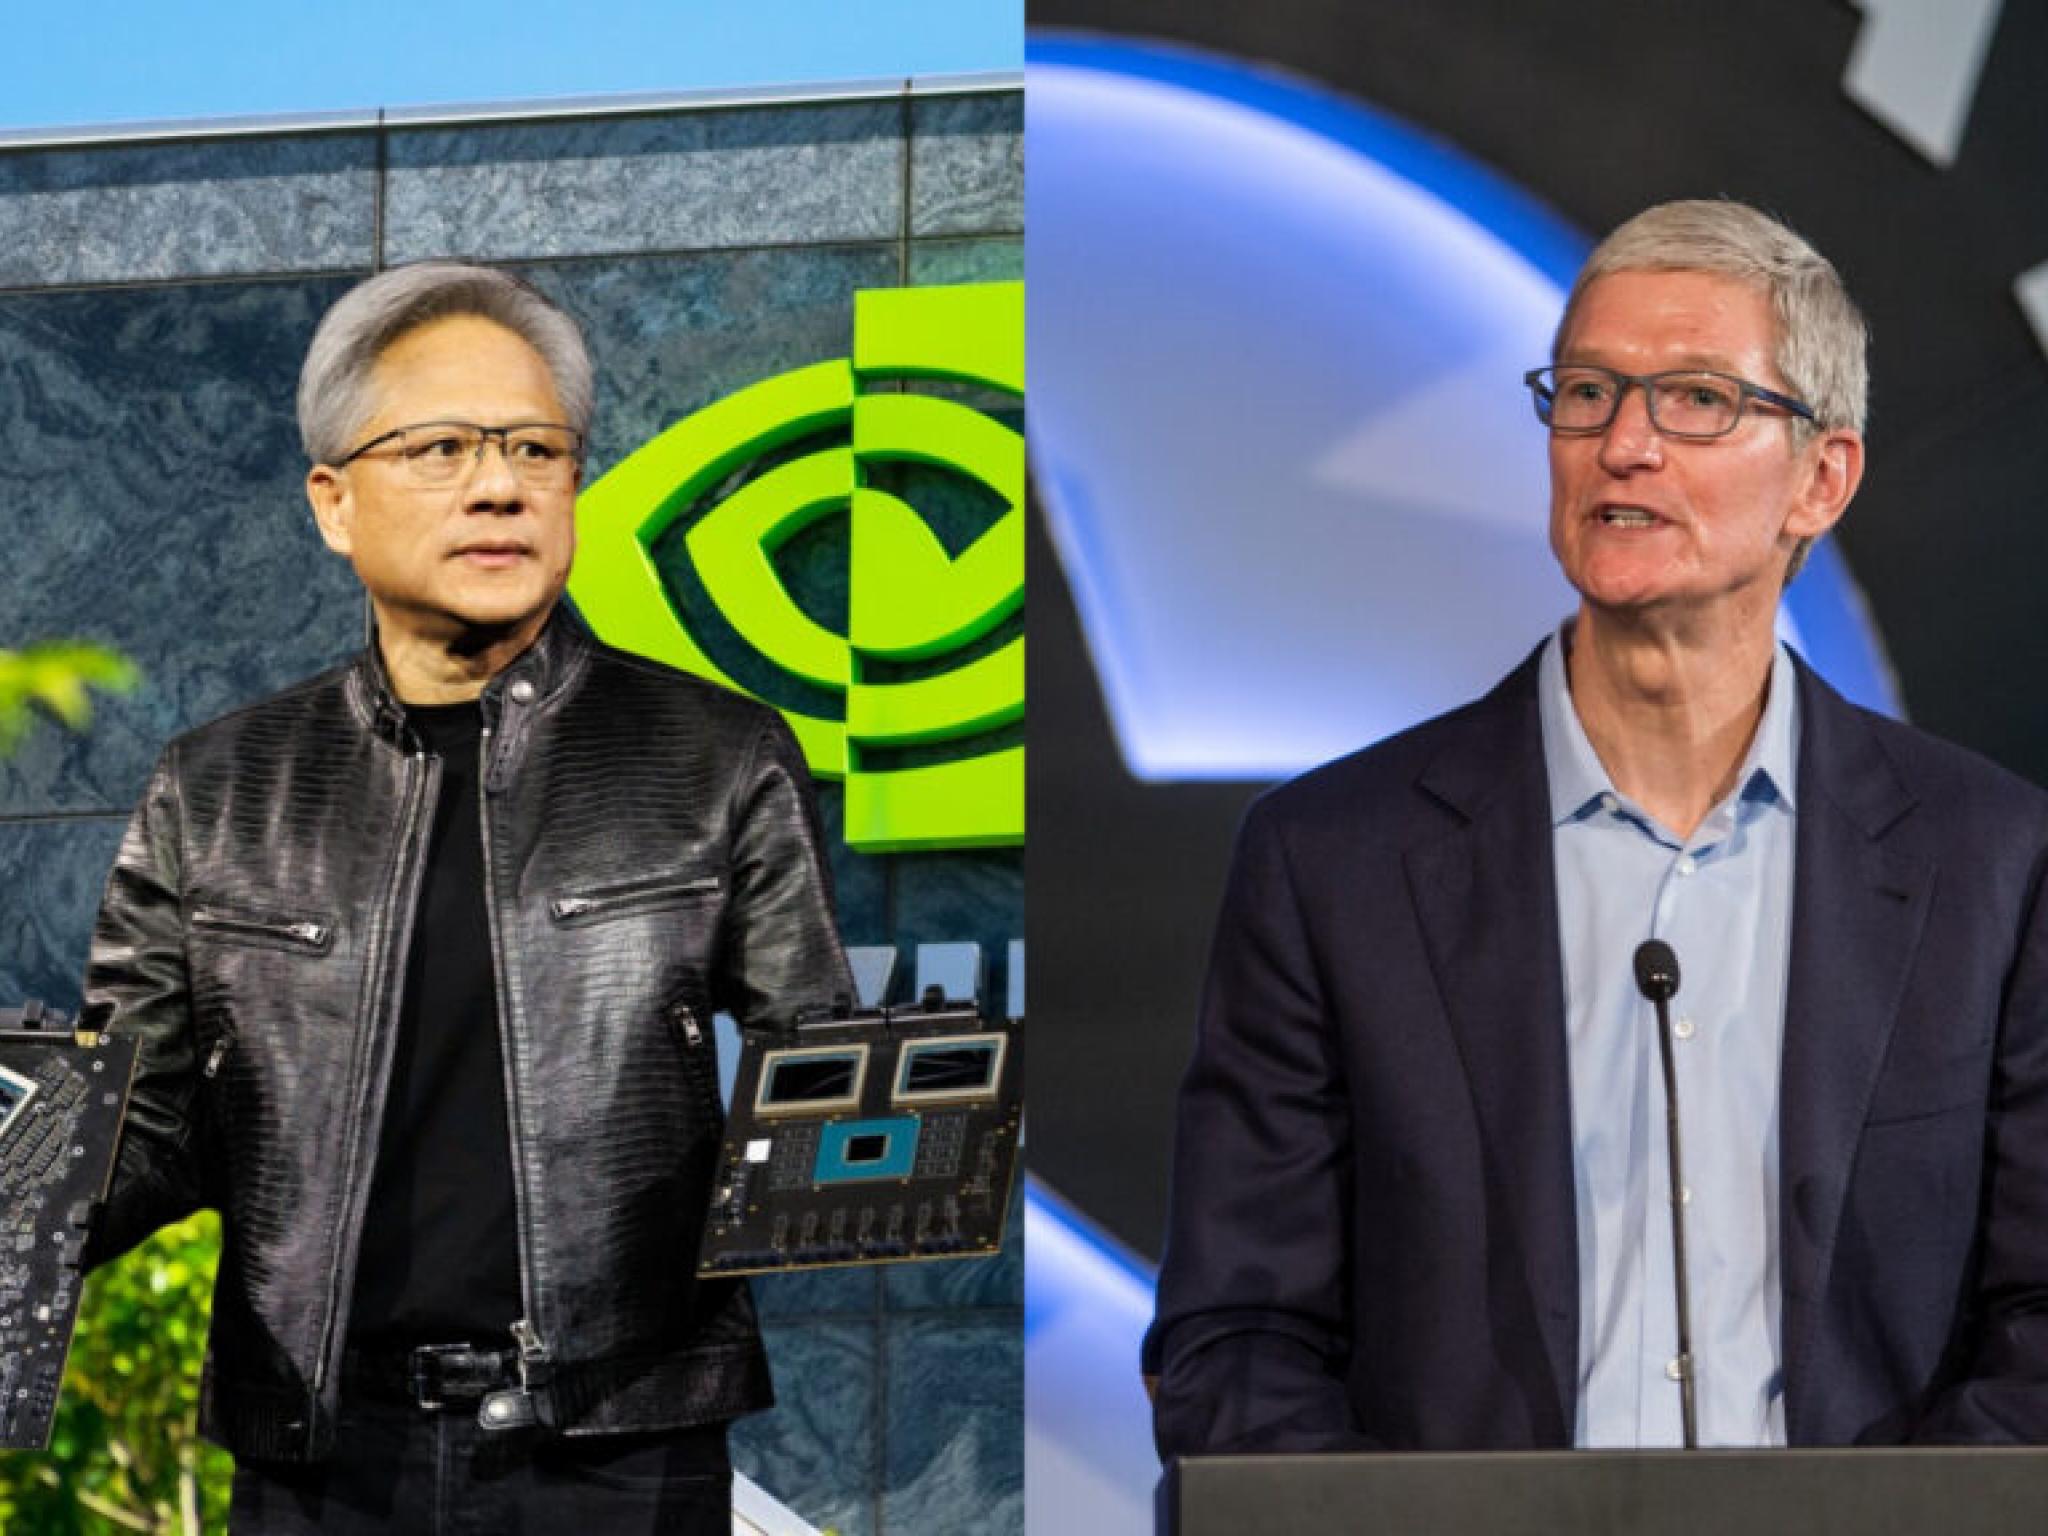  ming-chi-kuos-prediction-comes-true-as-nvidia-surpasses-apple-becoming-the-second-most-valuable-company-strong-ai-growth-contrasts-innovation-challenges-faced-by-consumer-electronics 